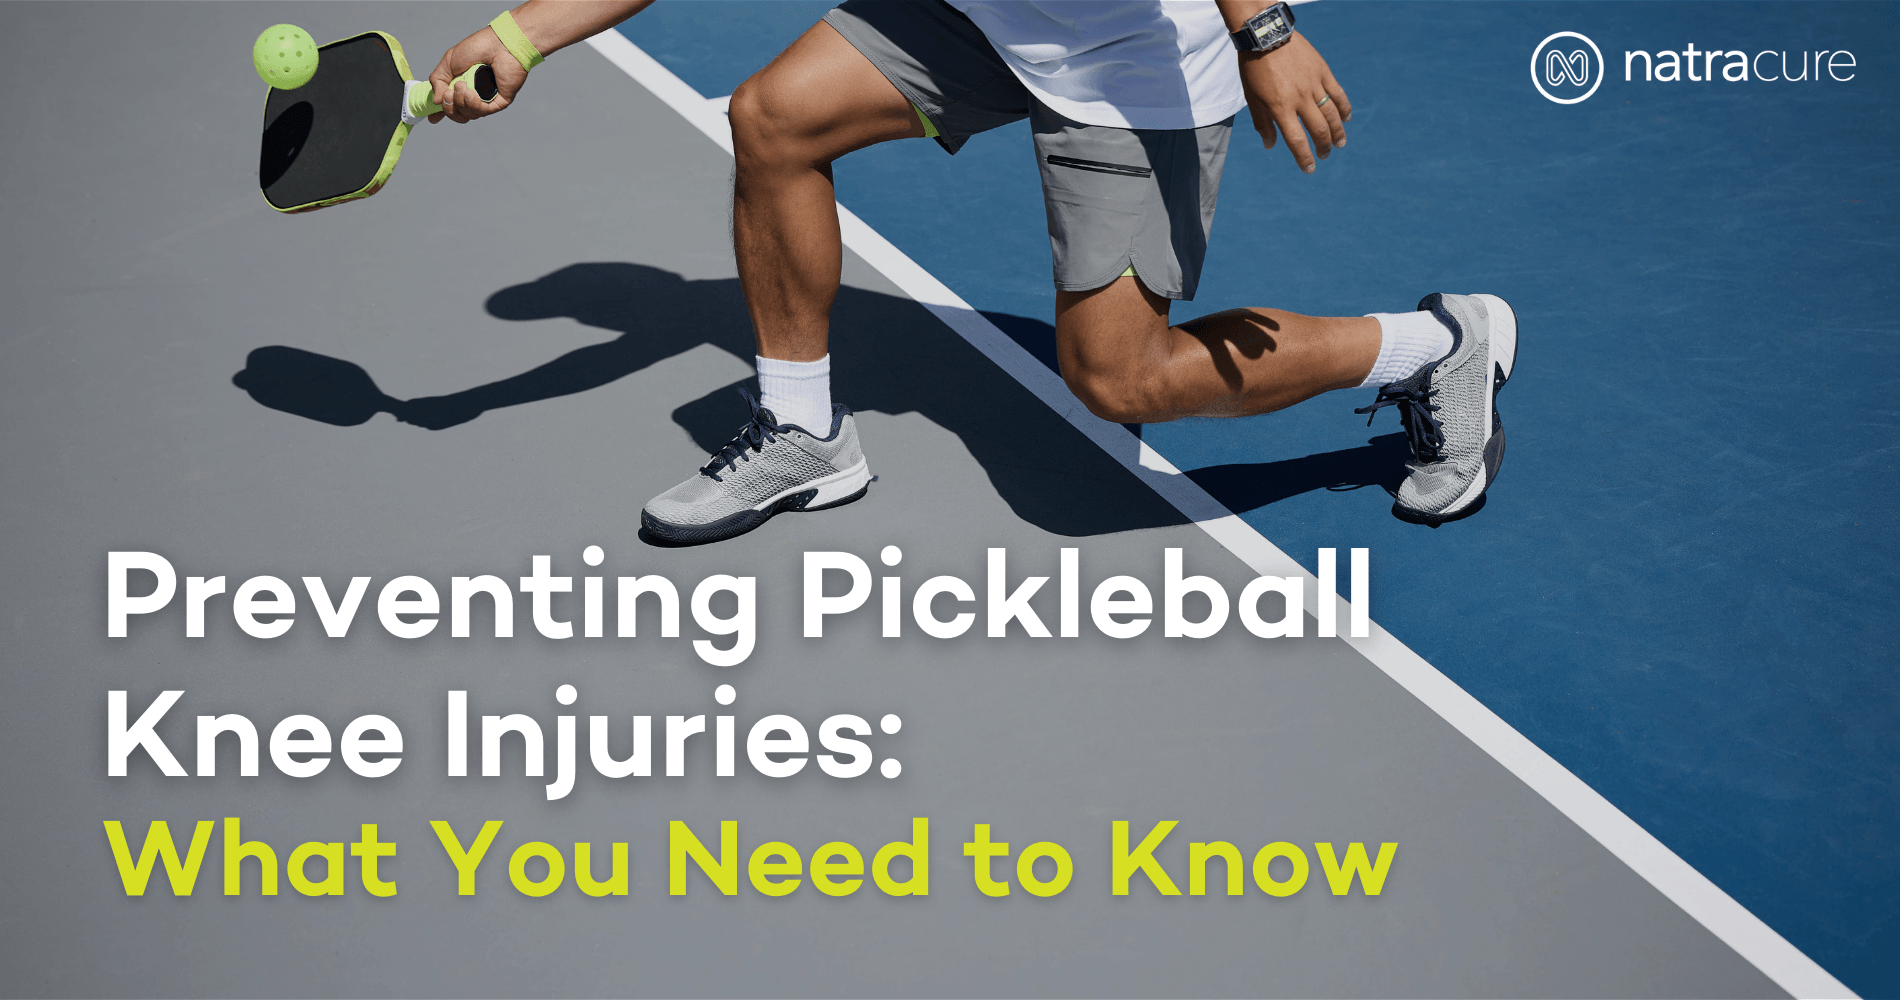 Preventing Pickleball Knee Injuries: What You Need to Know | NatraCure